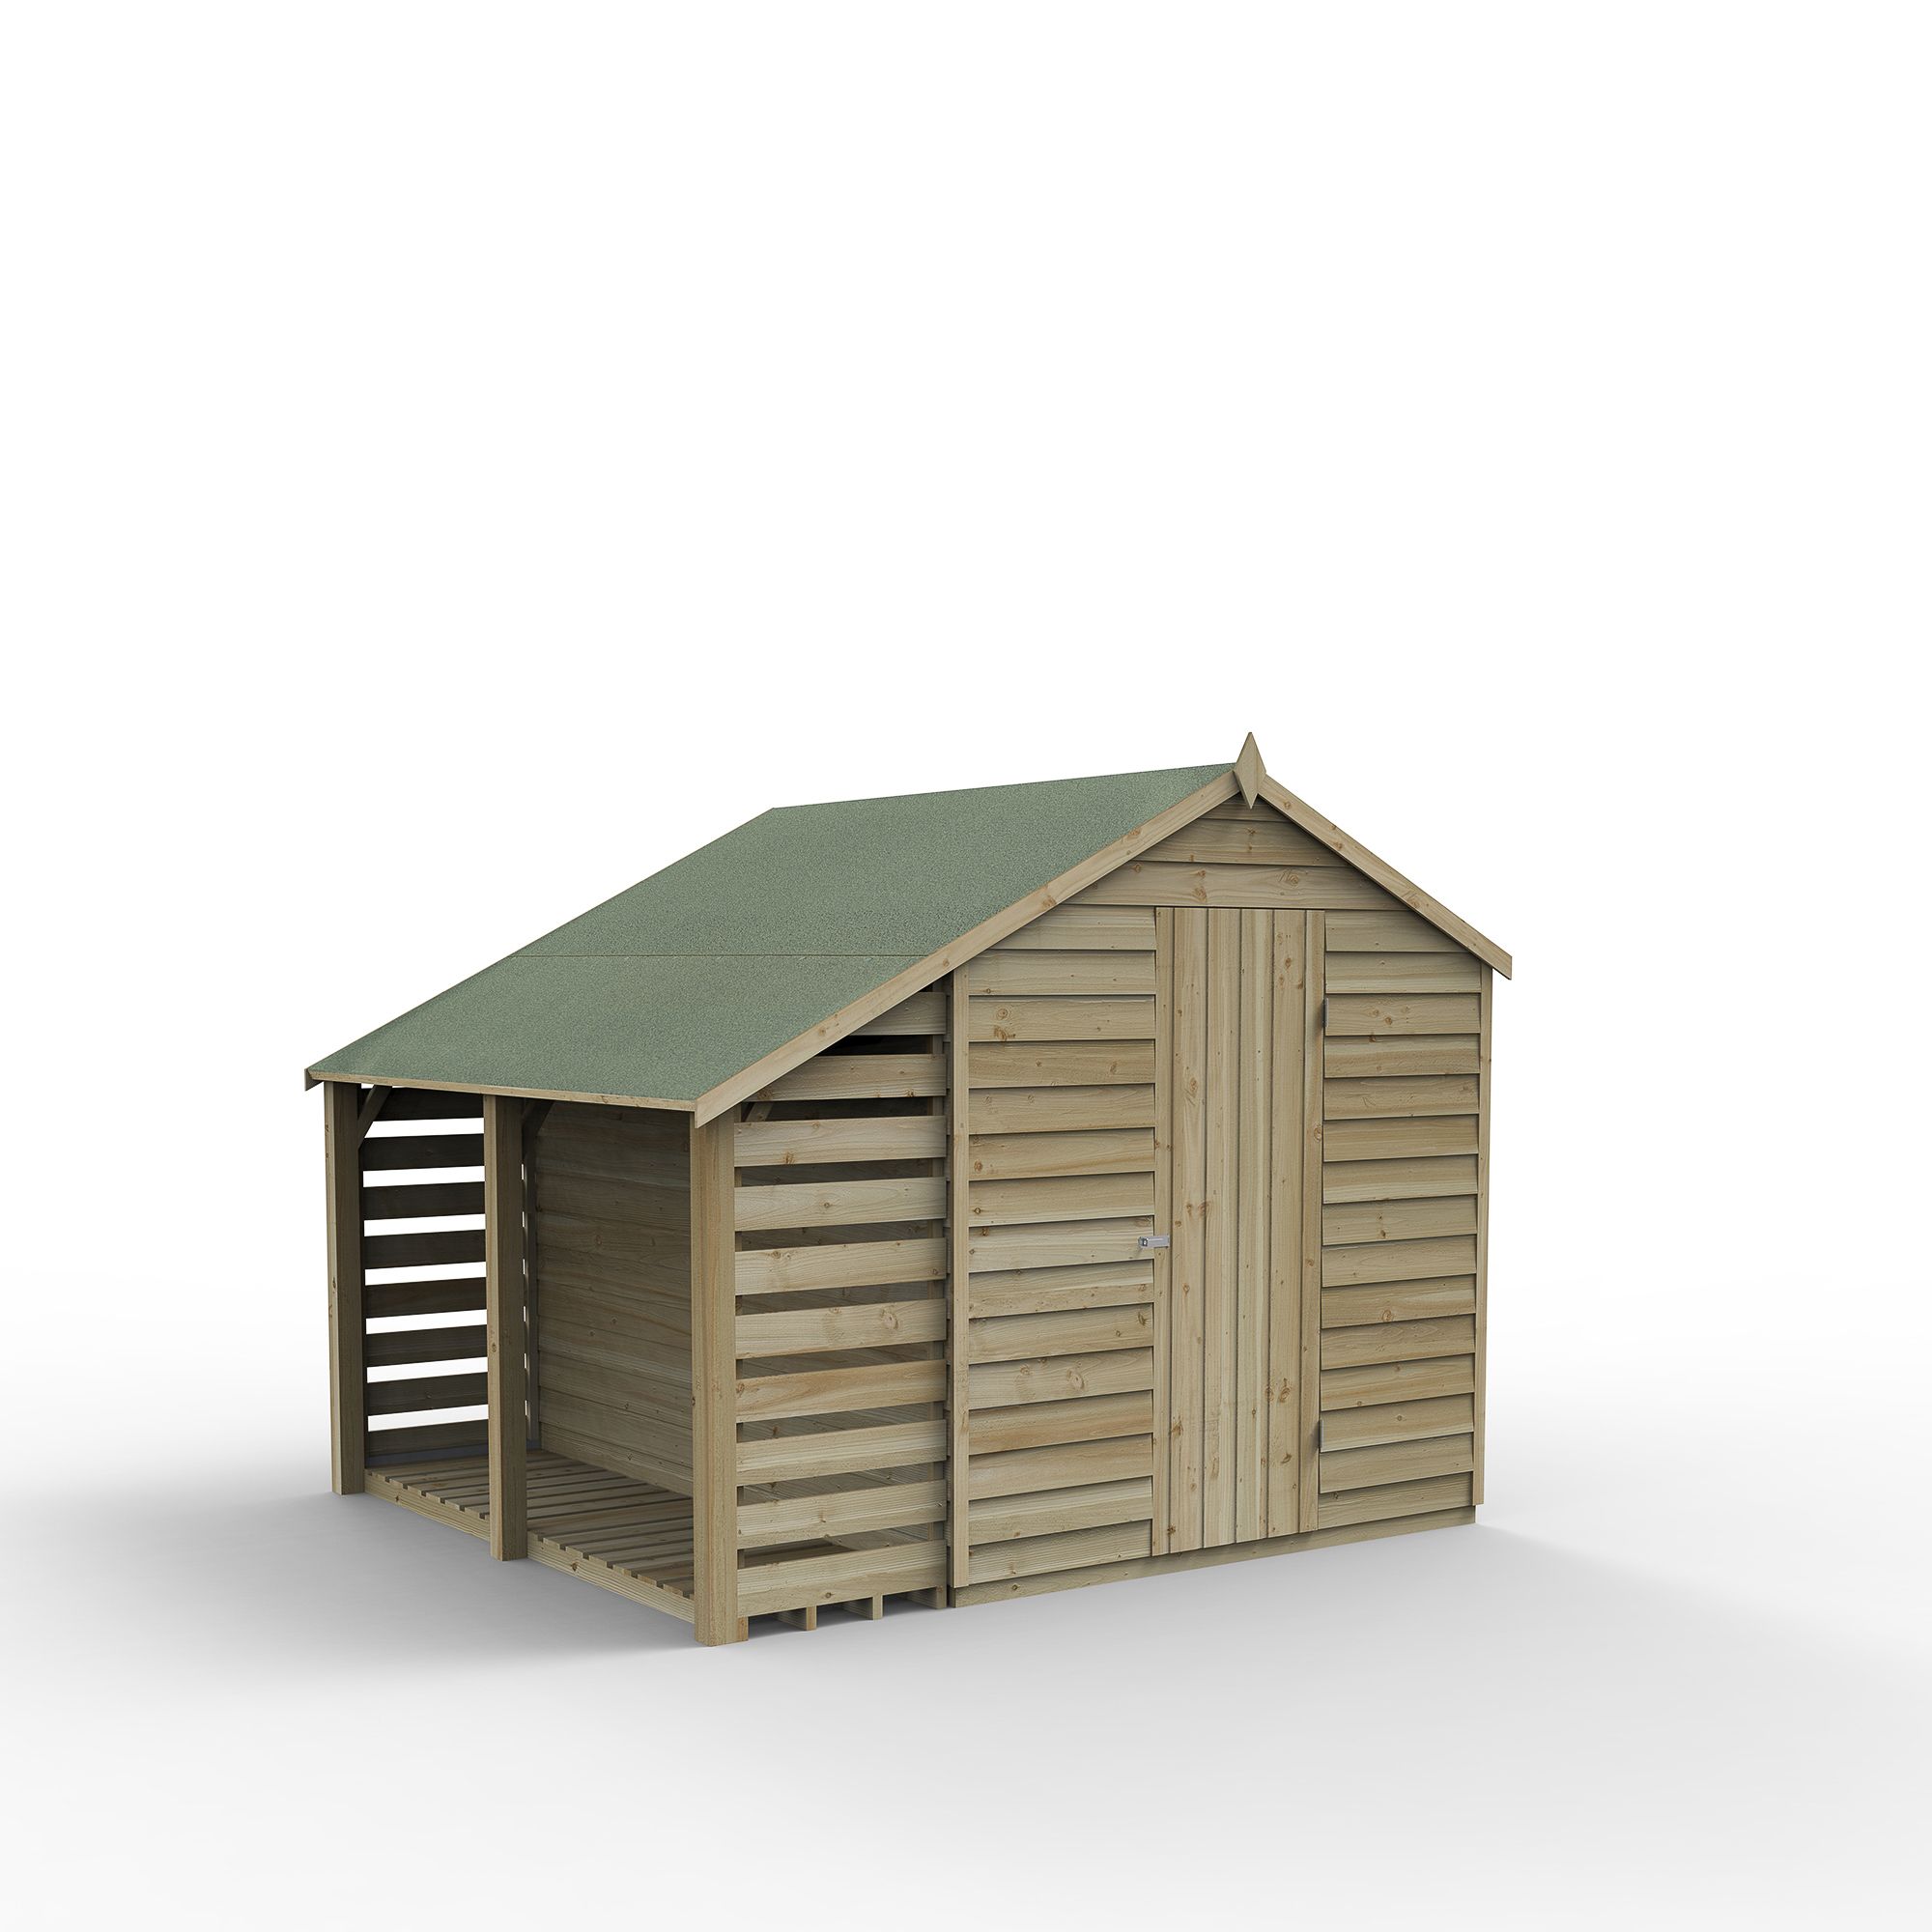 Forest Garden Shed Overlap 8x6 ft Apex Wooden Pressure treated Shed with floor & 2 windows